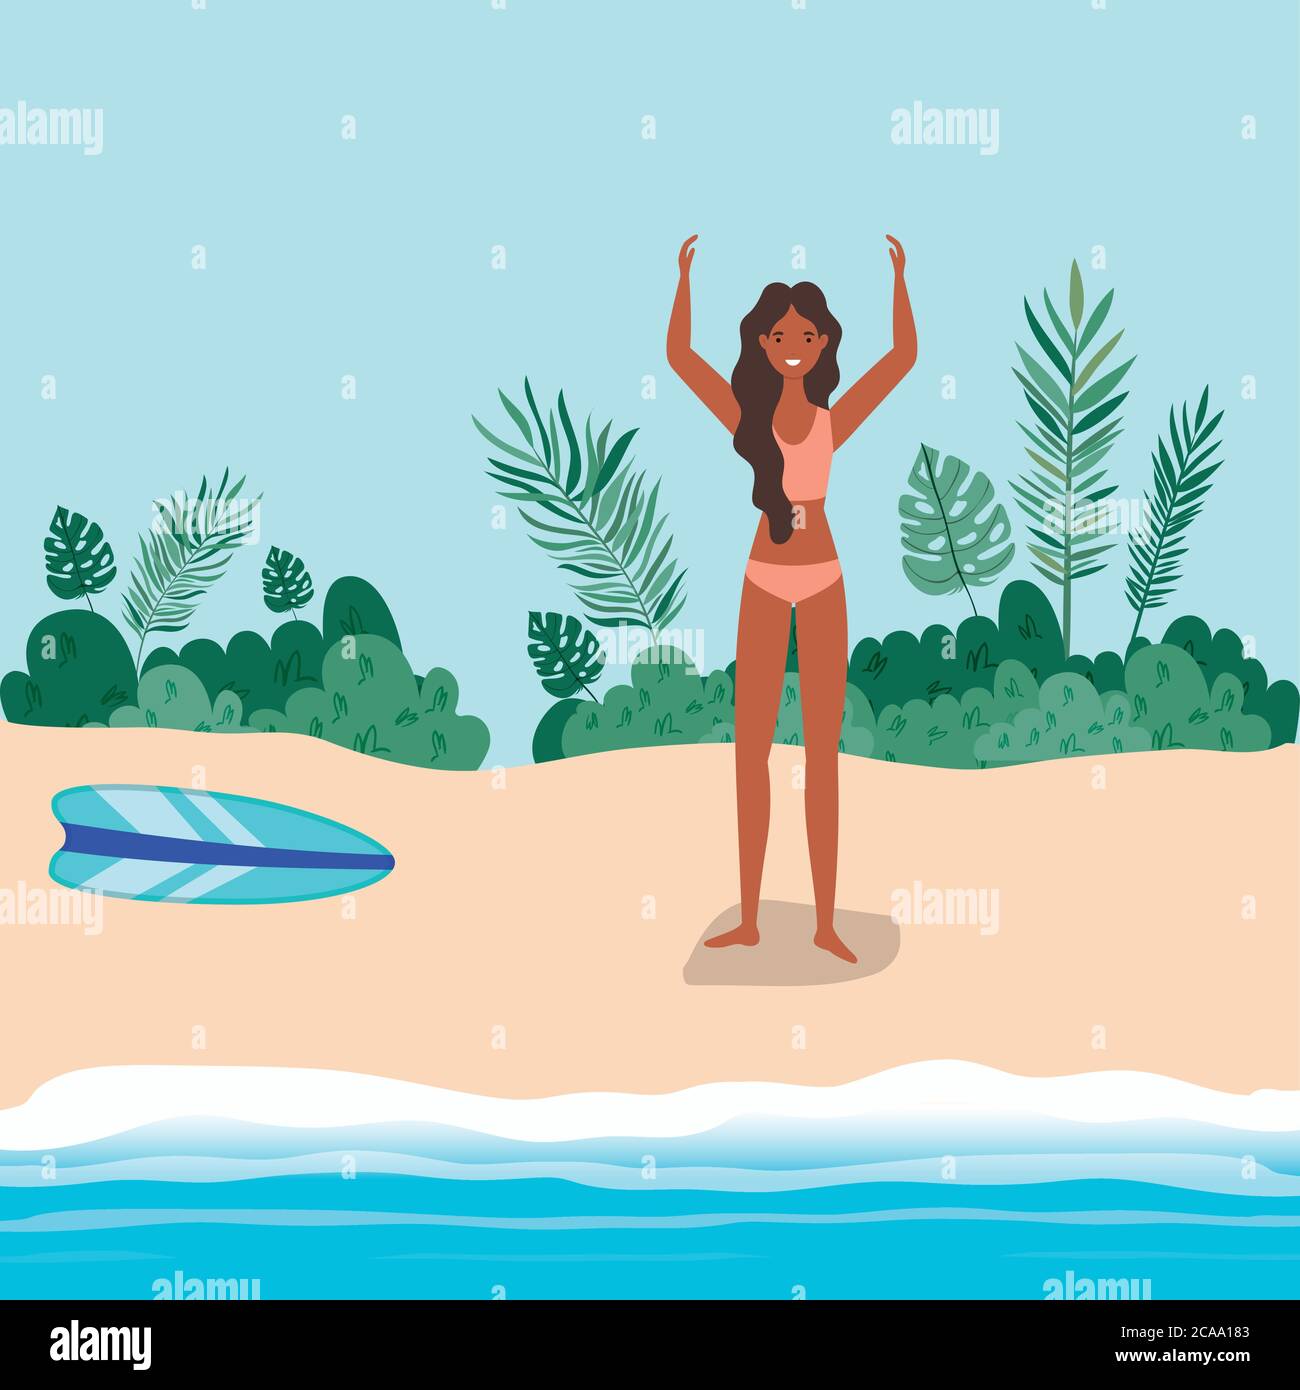 Girl cartoon with swimsuit at the beach design summer vacation tropical and relaxation theme vector illustration stock vector image art